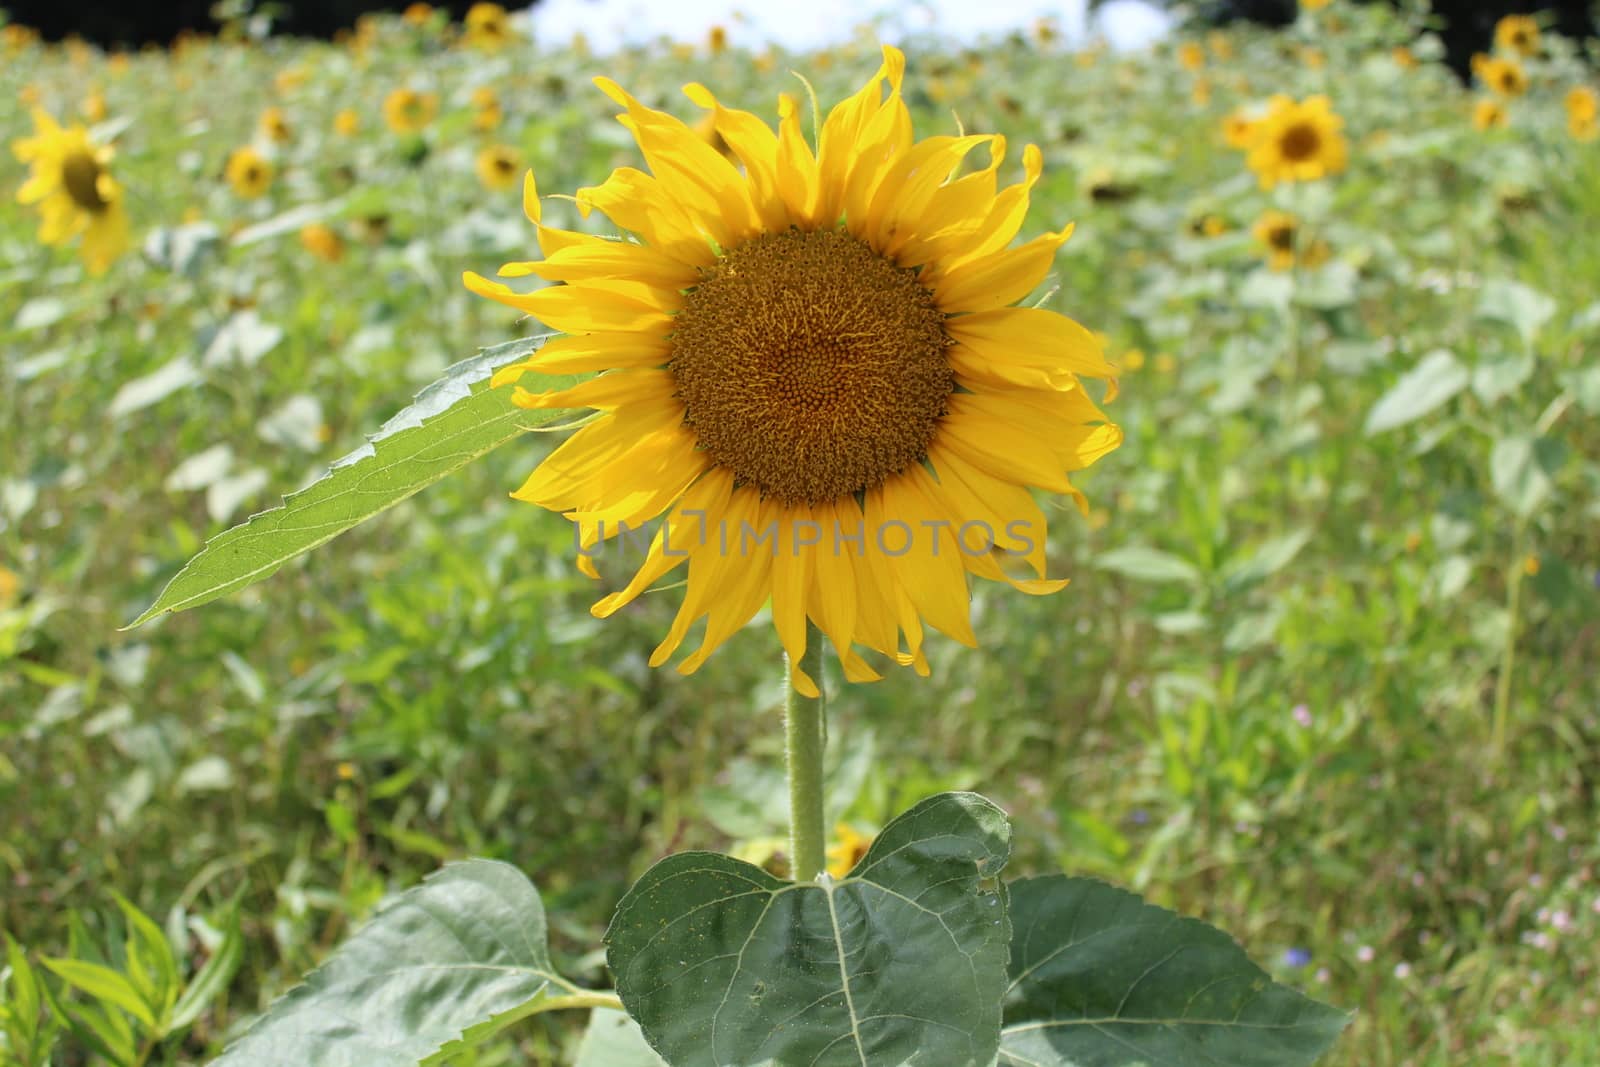 The picture shows beautiful sunflowers in the summer.